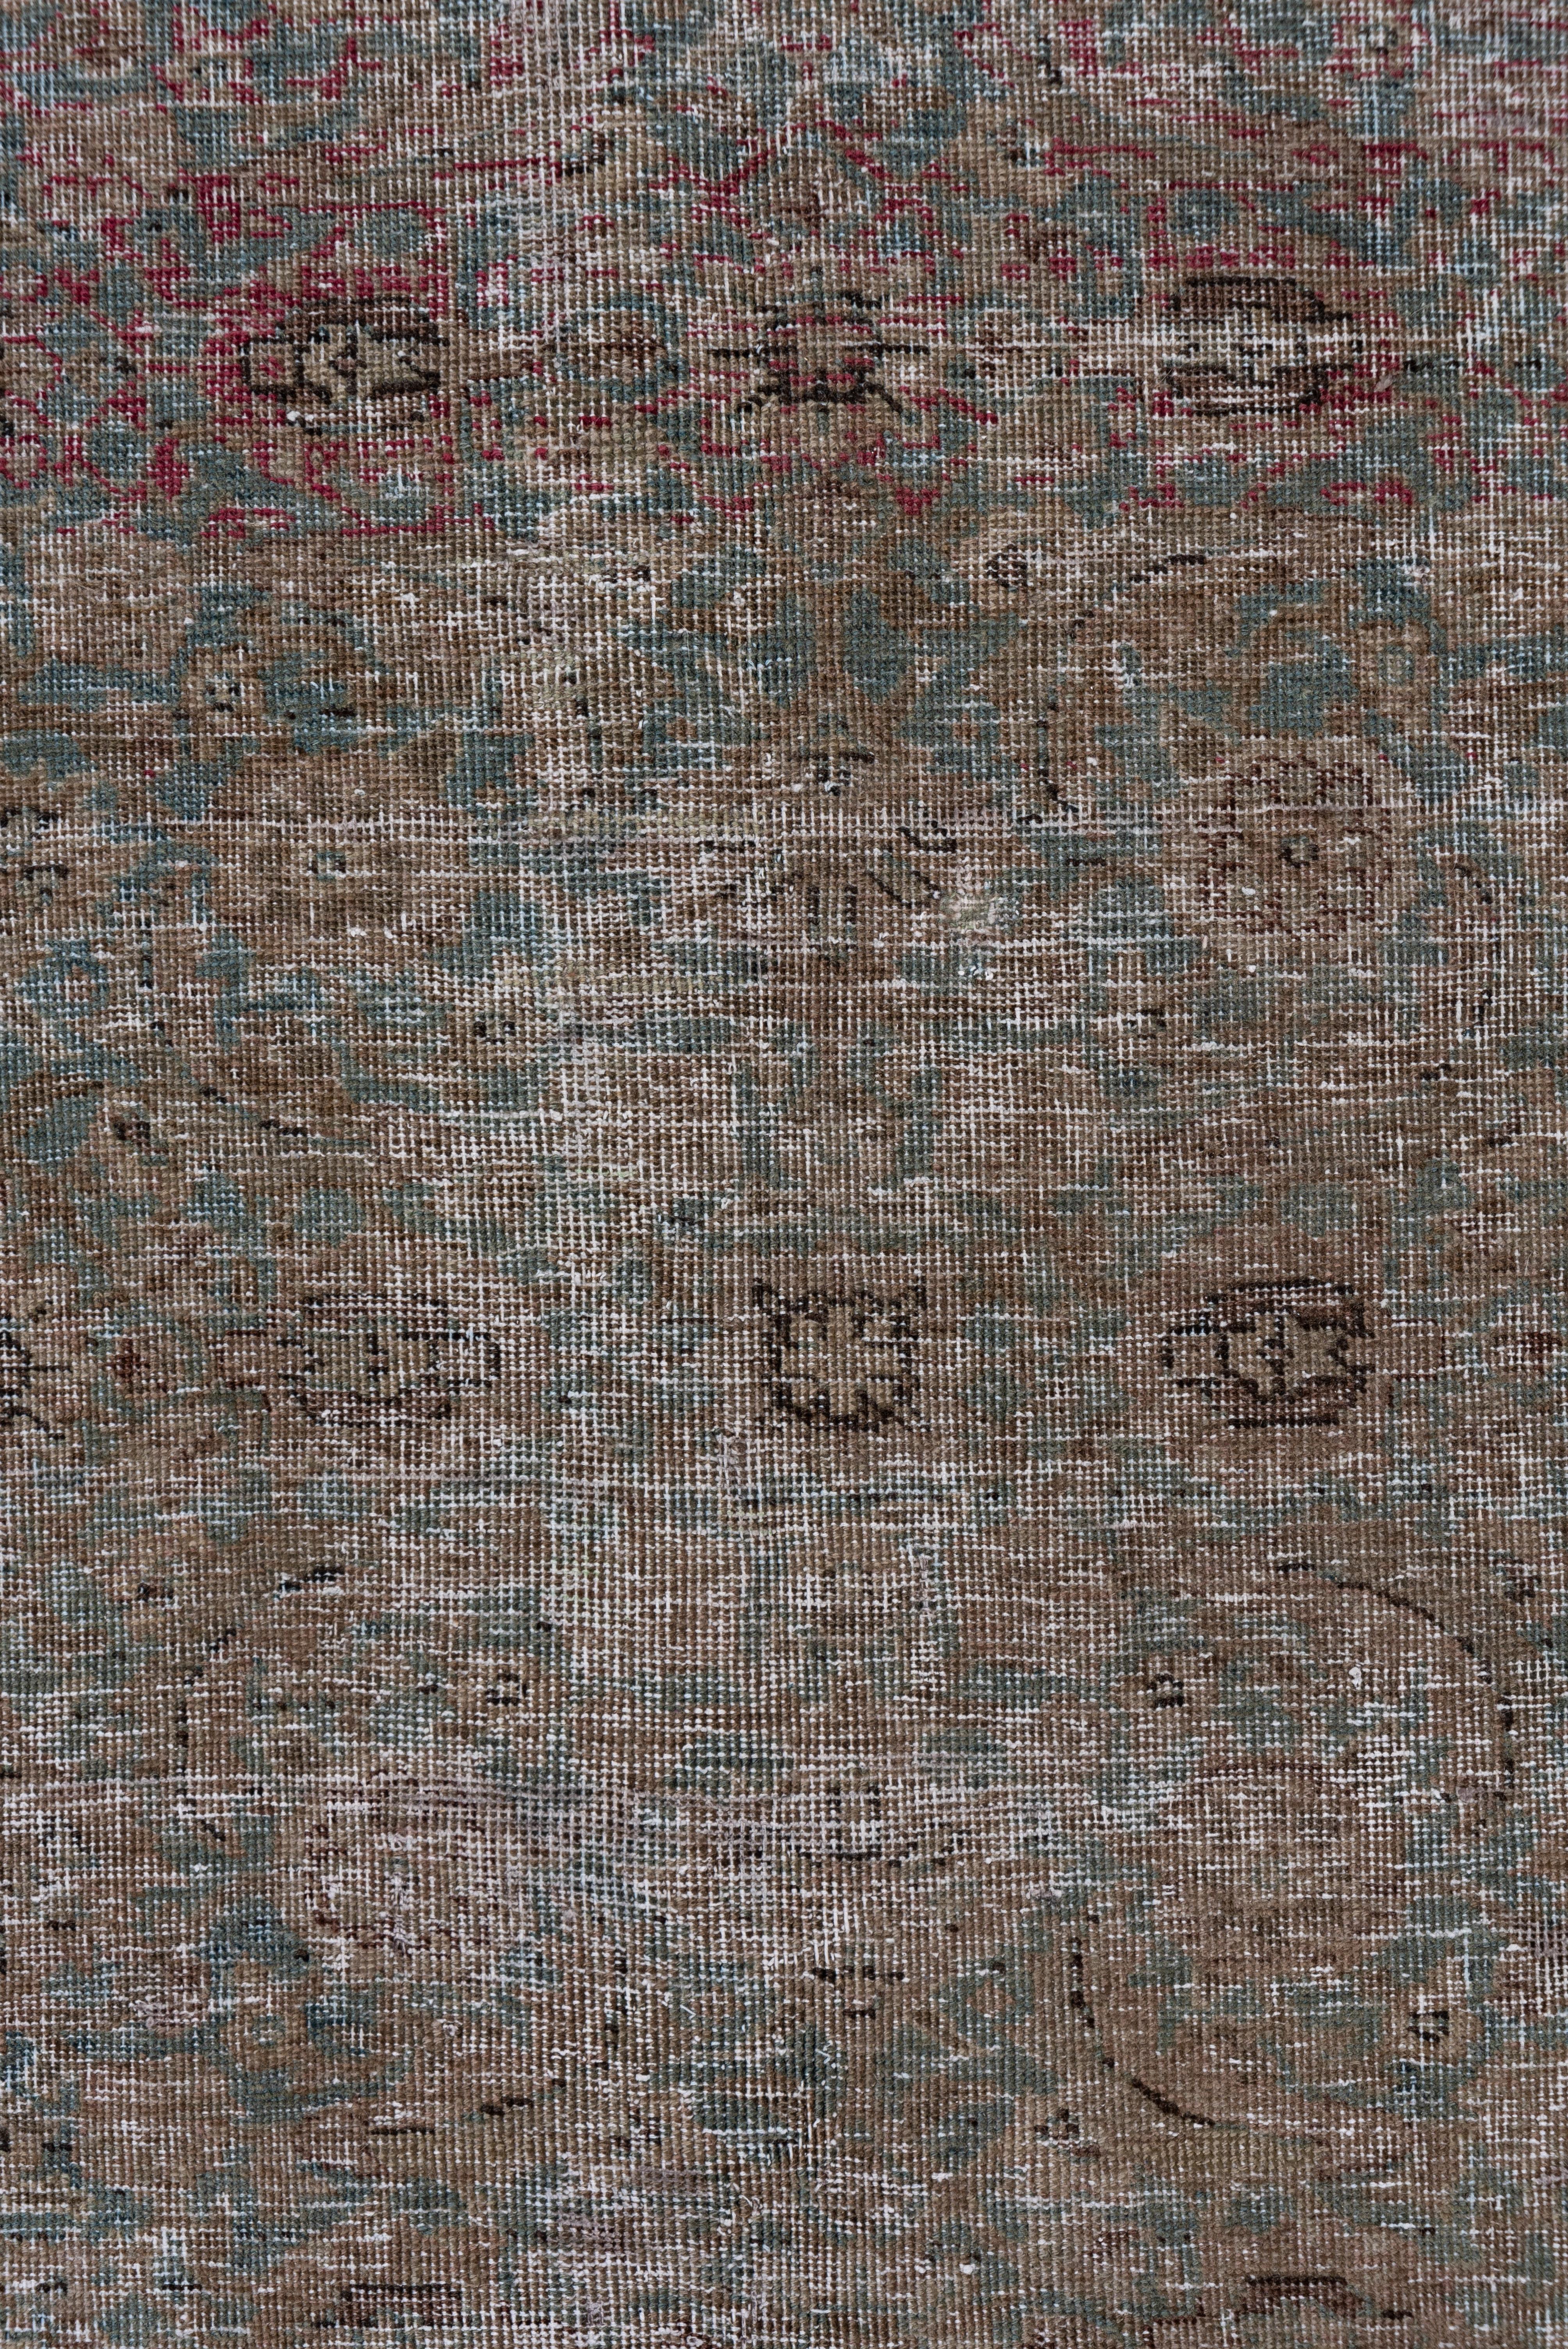 Mid-20th Century Shabby Chic & Colorful Antique Persian Tabriz Rug, Blue and Green All-Over Field